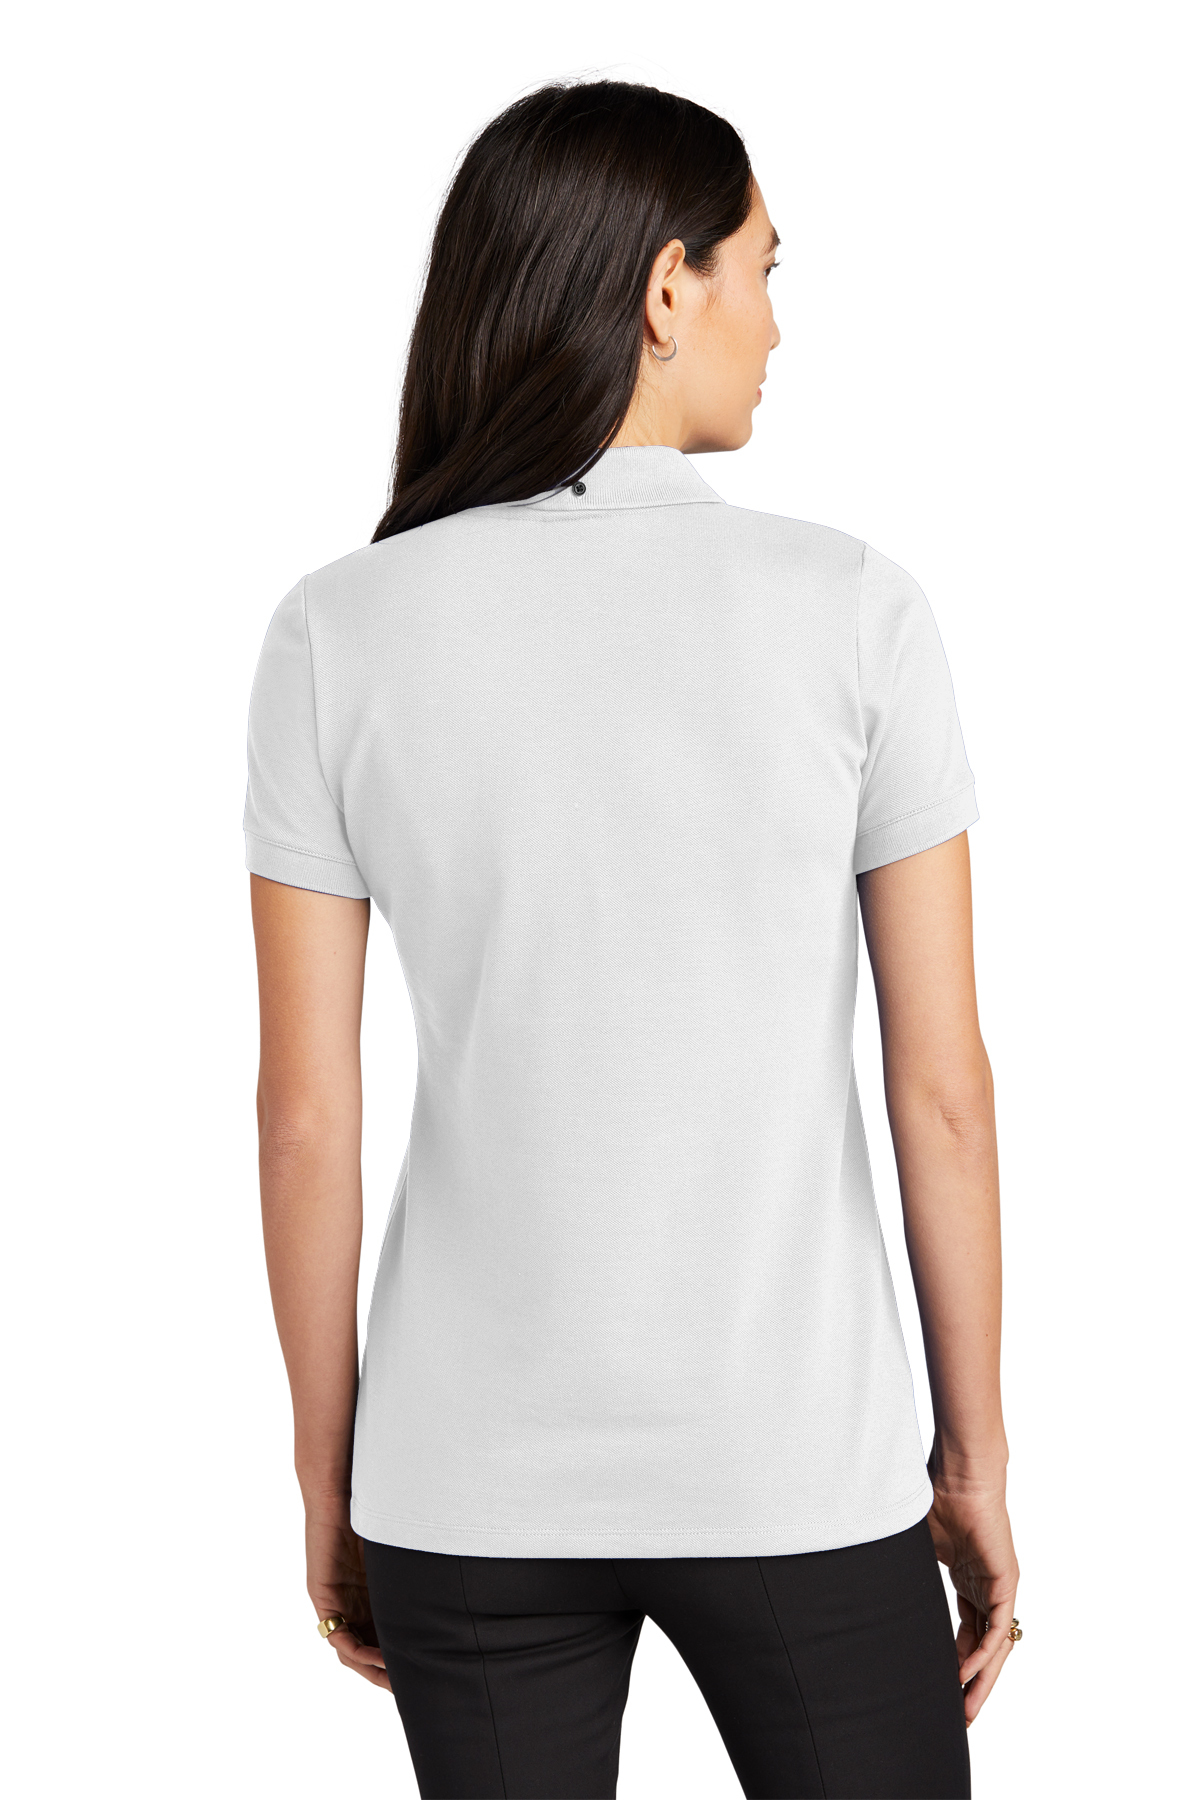 Mercer+Mettle Women’s Stretch Heavyweight Pique Polo | Product ...